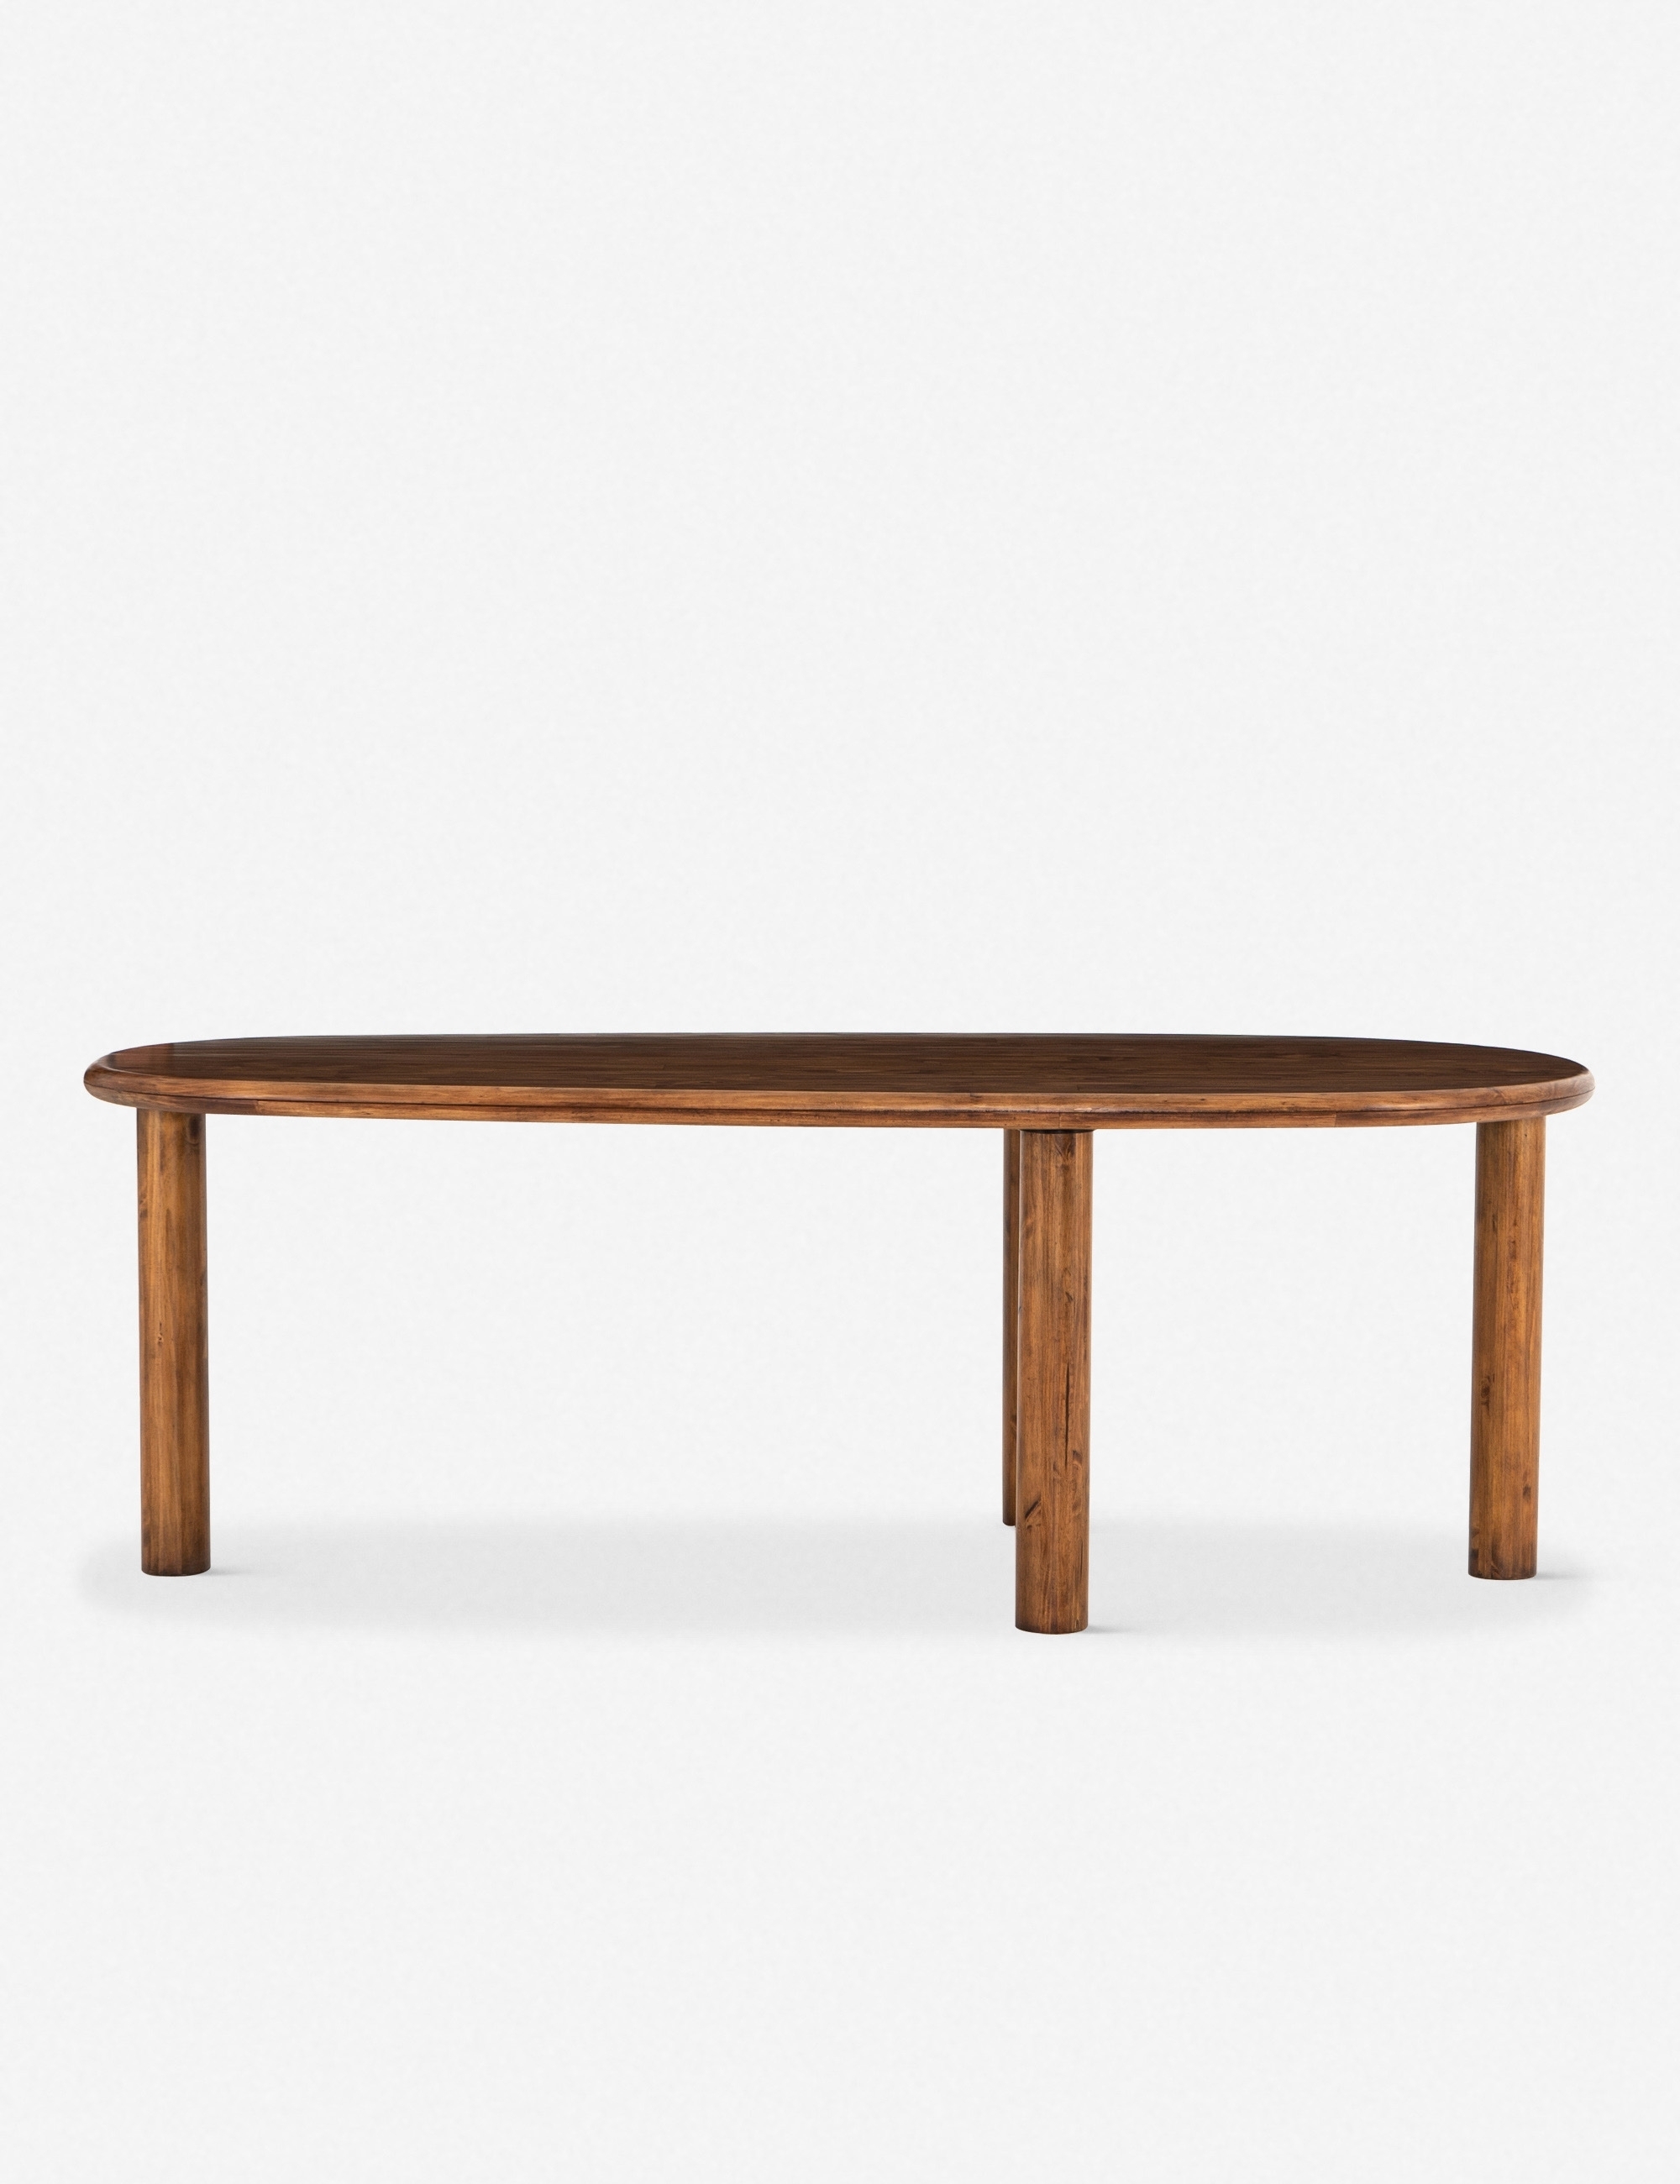 Marquesa Dining Table - Image 5